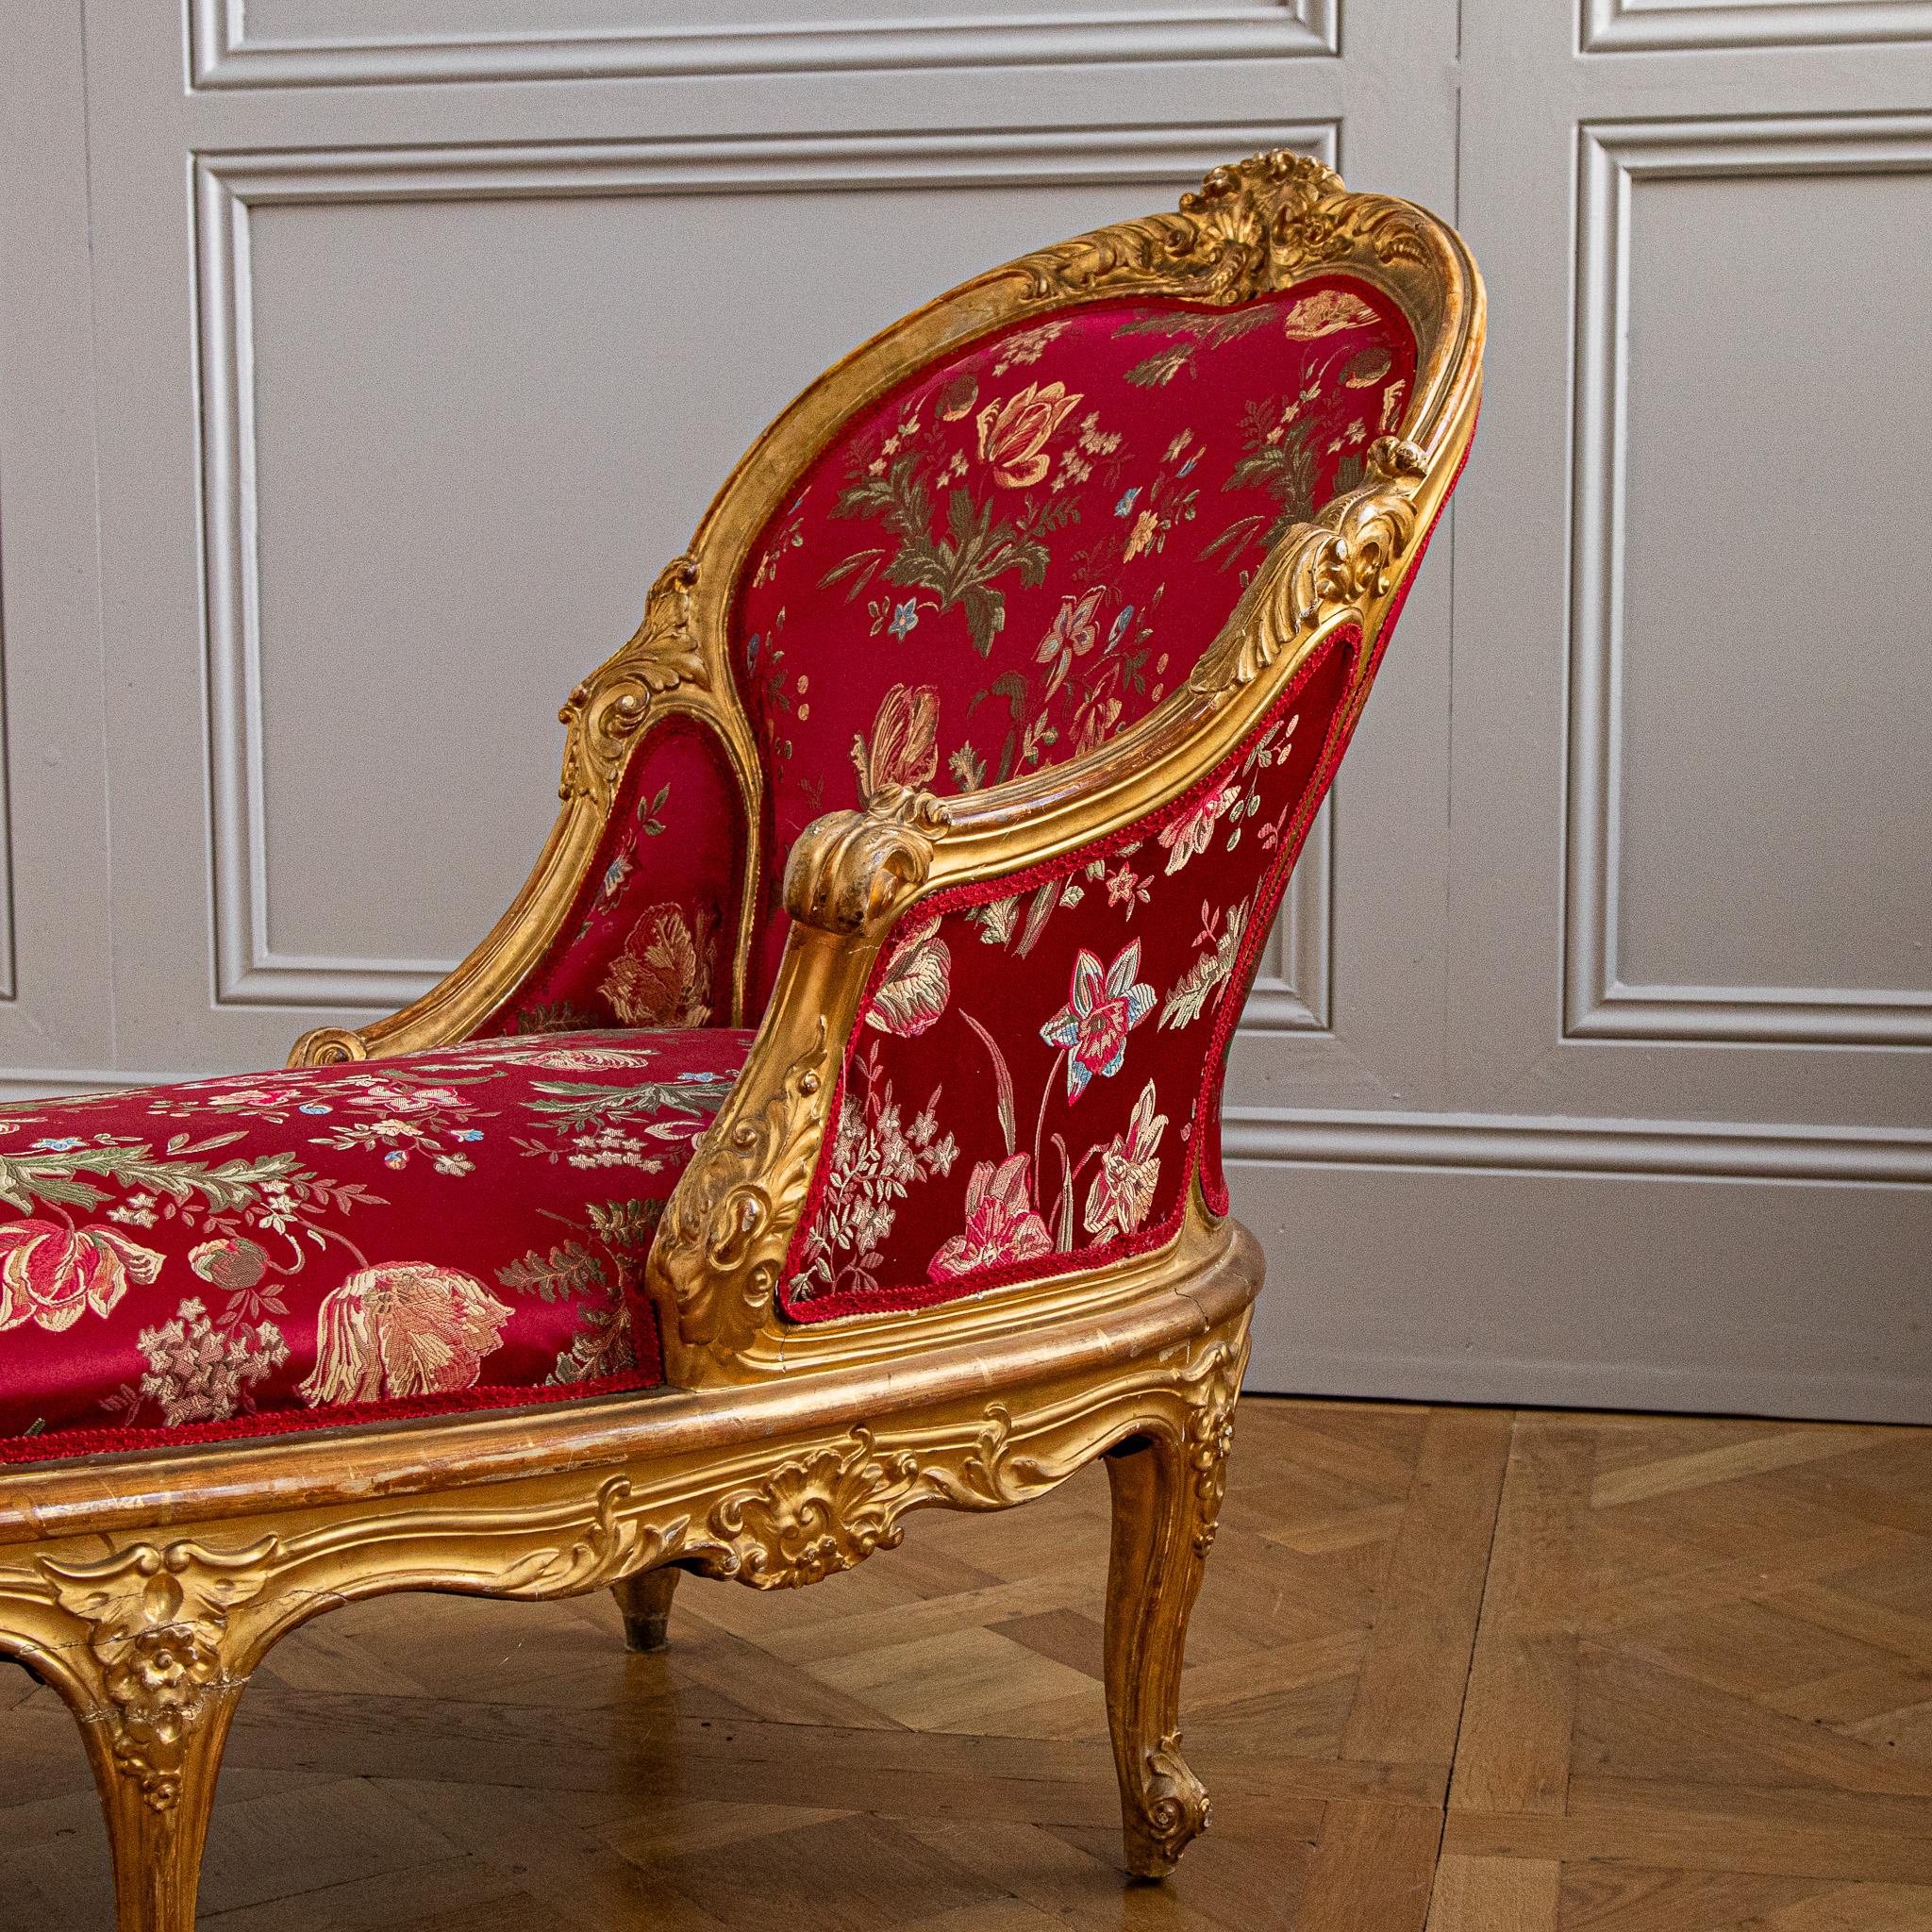 Circa 1880 Italian Giltwood LXV Style Chaise Longue For Sale 5